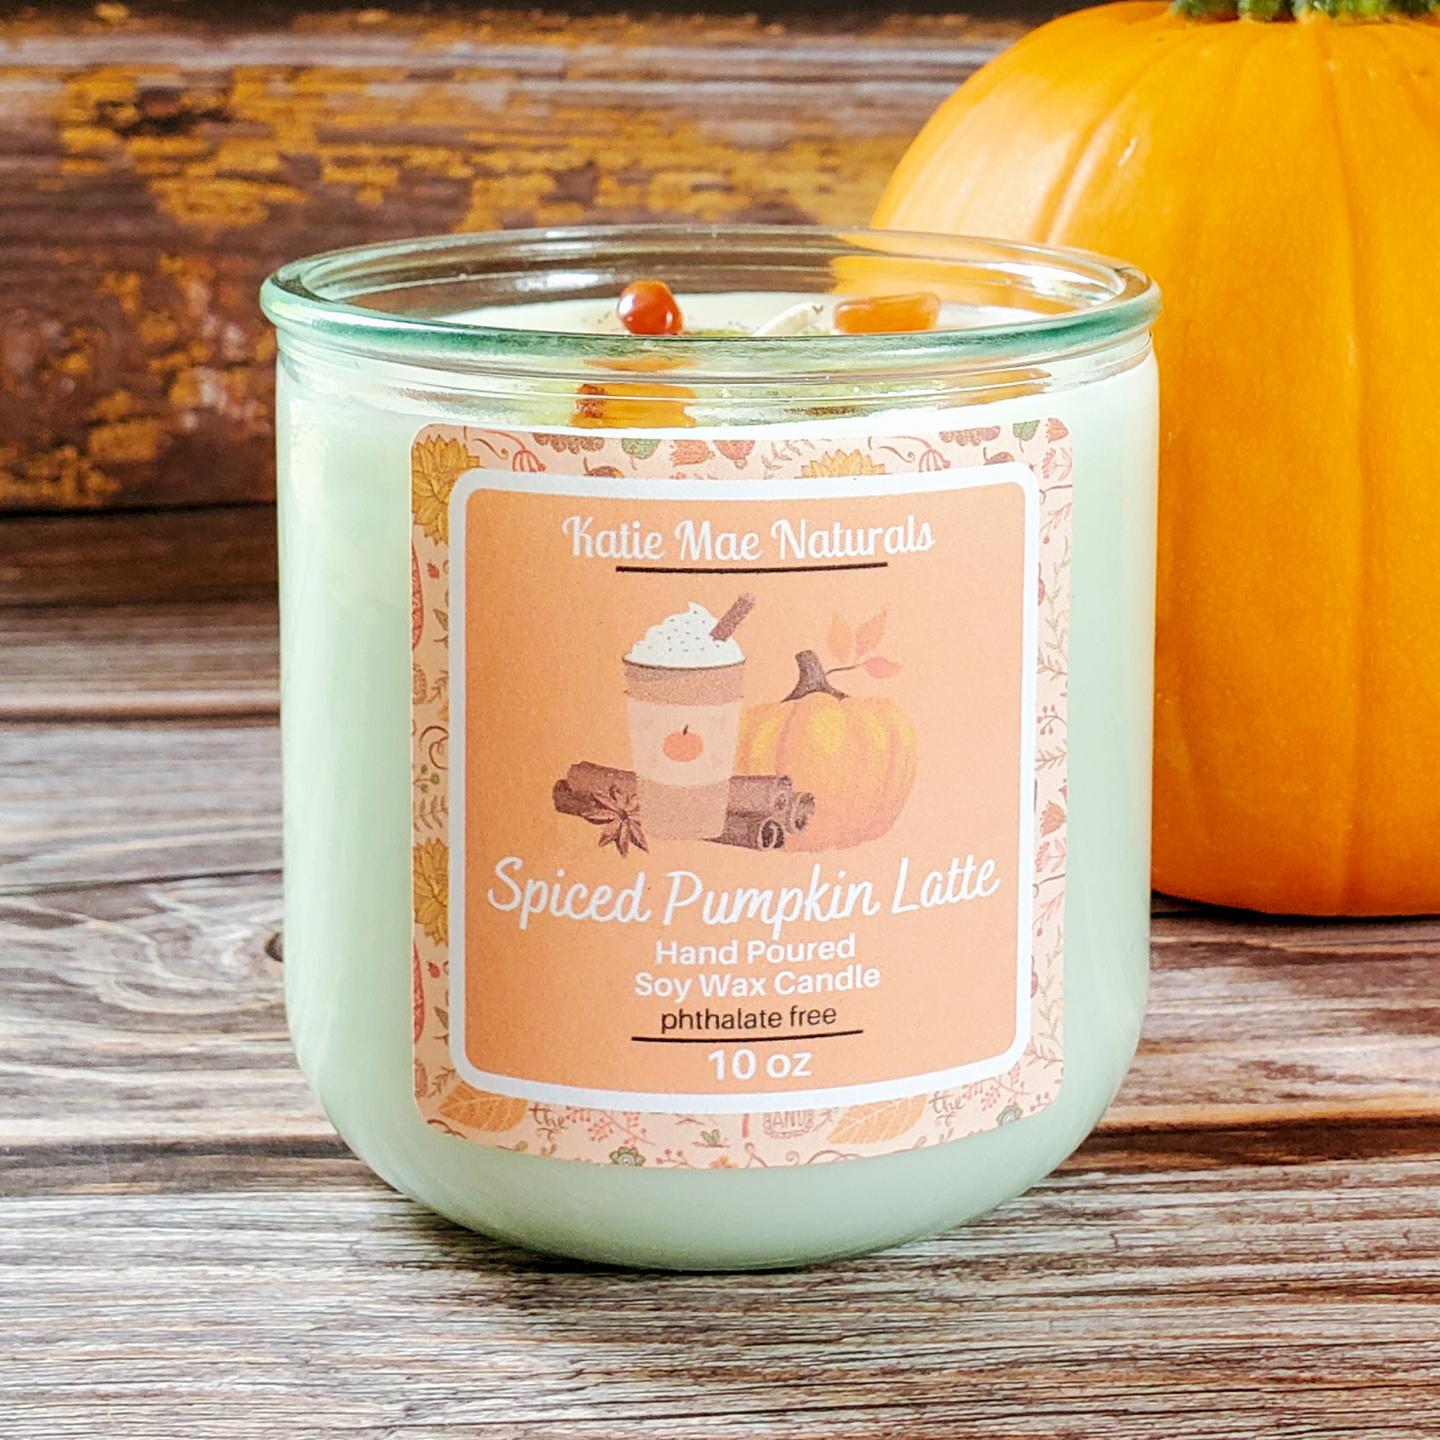 Pumpkin spice latte scented candle